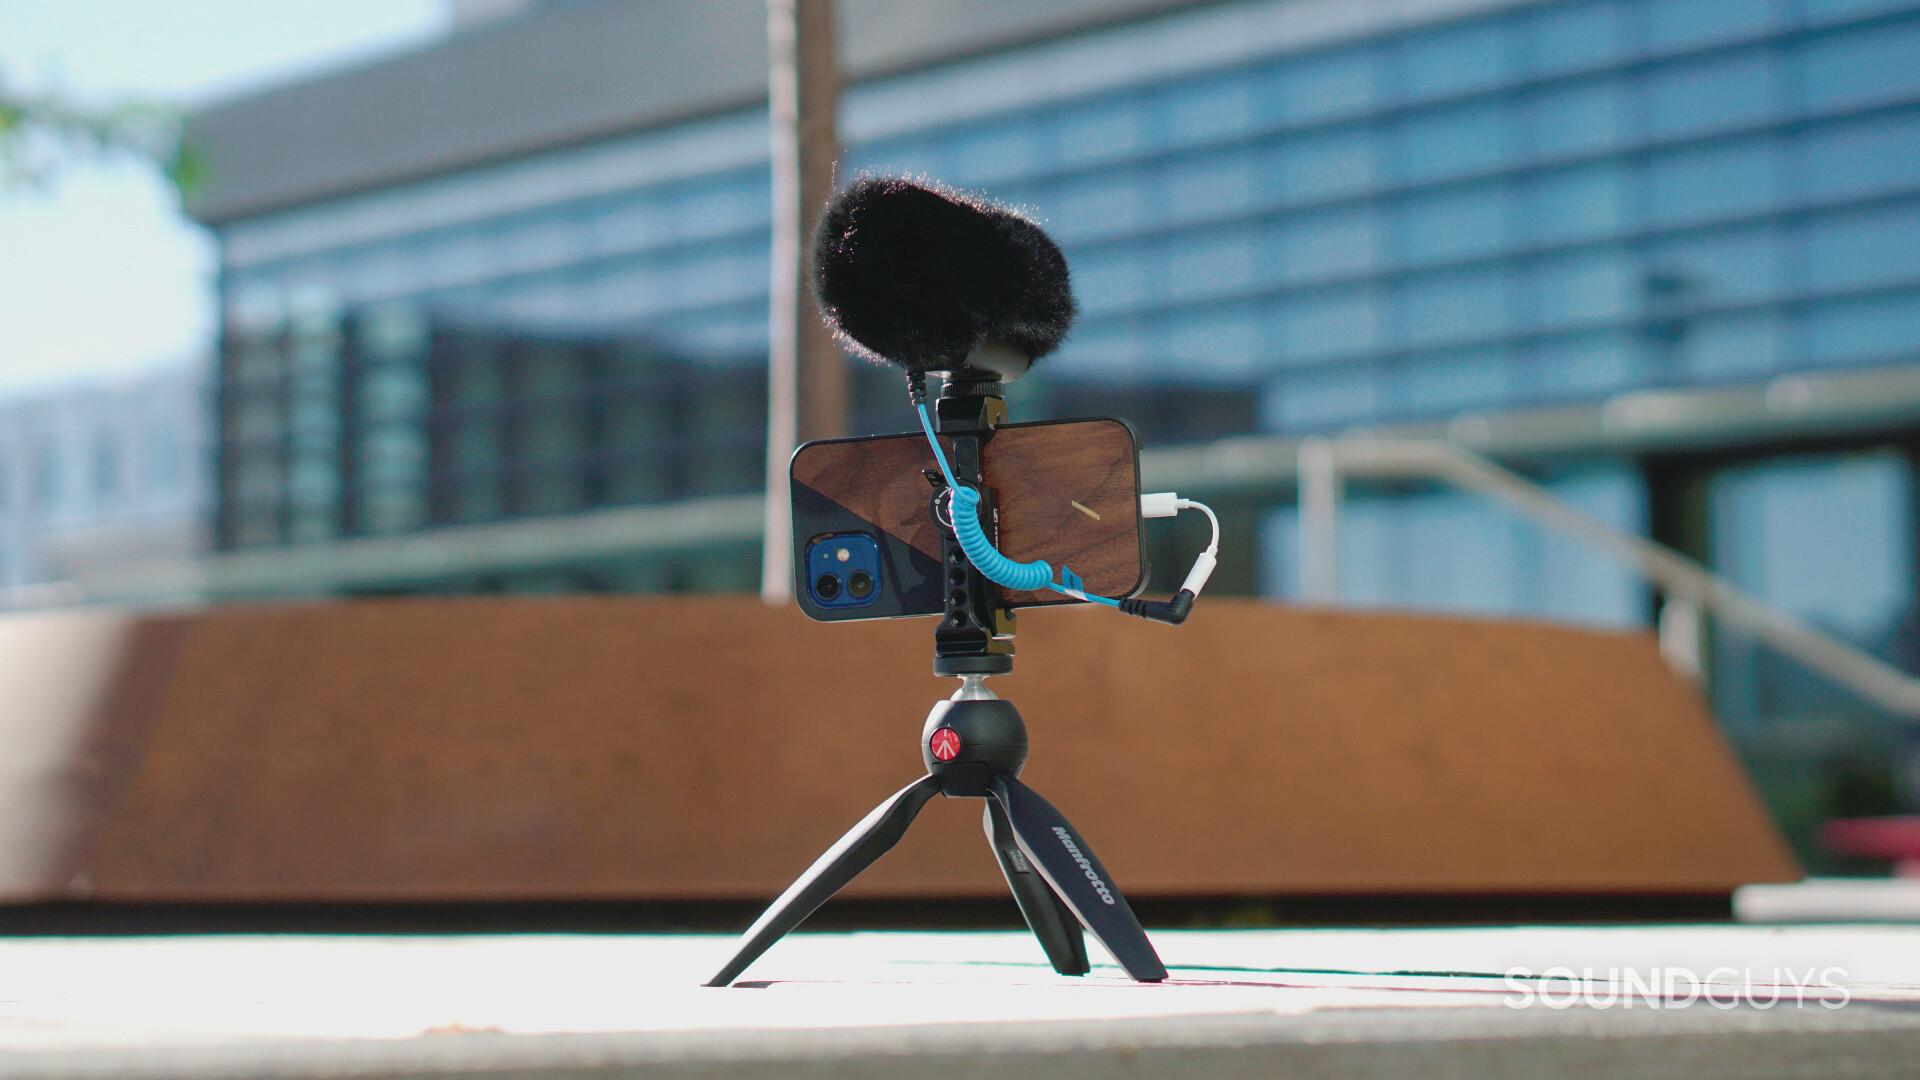 The Sennheiser MKE 400 Mobile Kit attached to a smartphone outside.